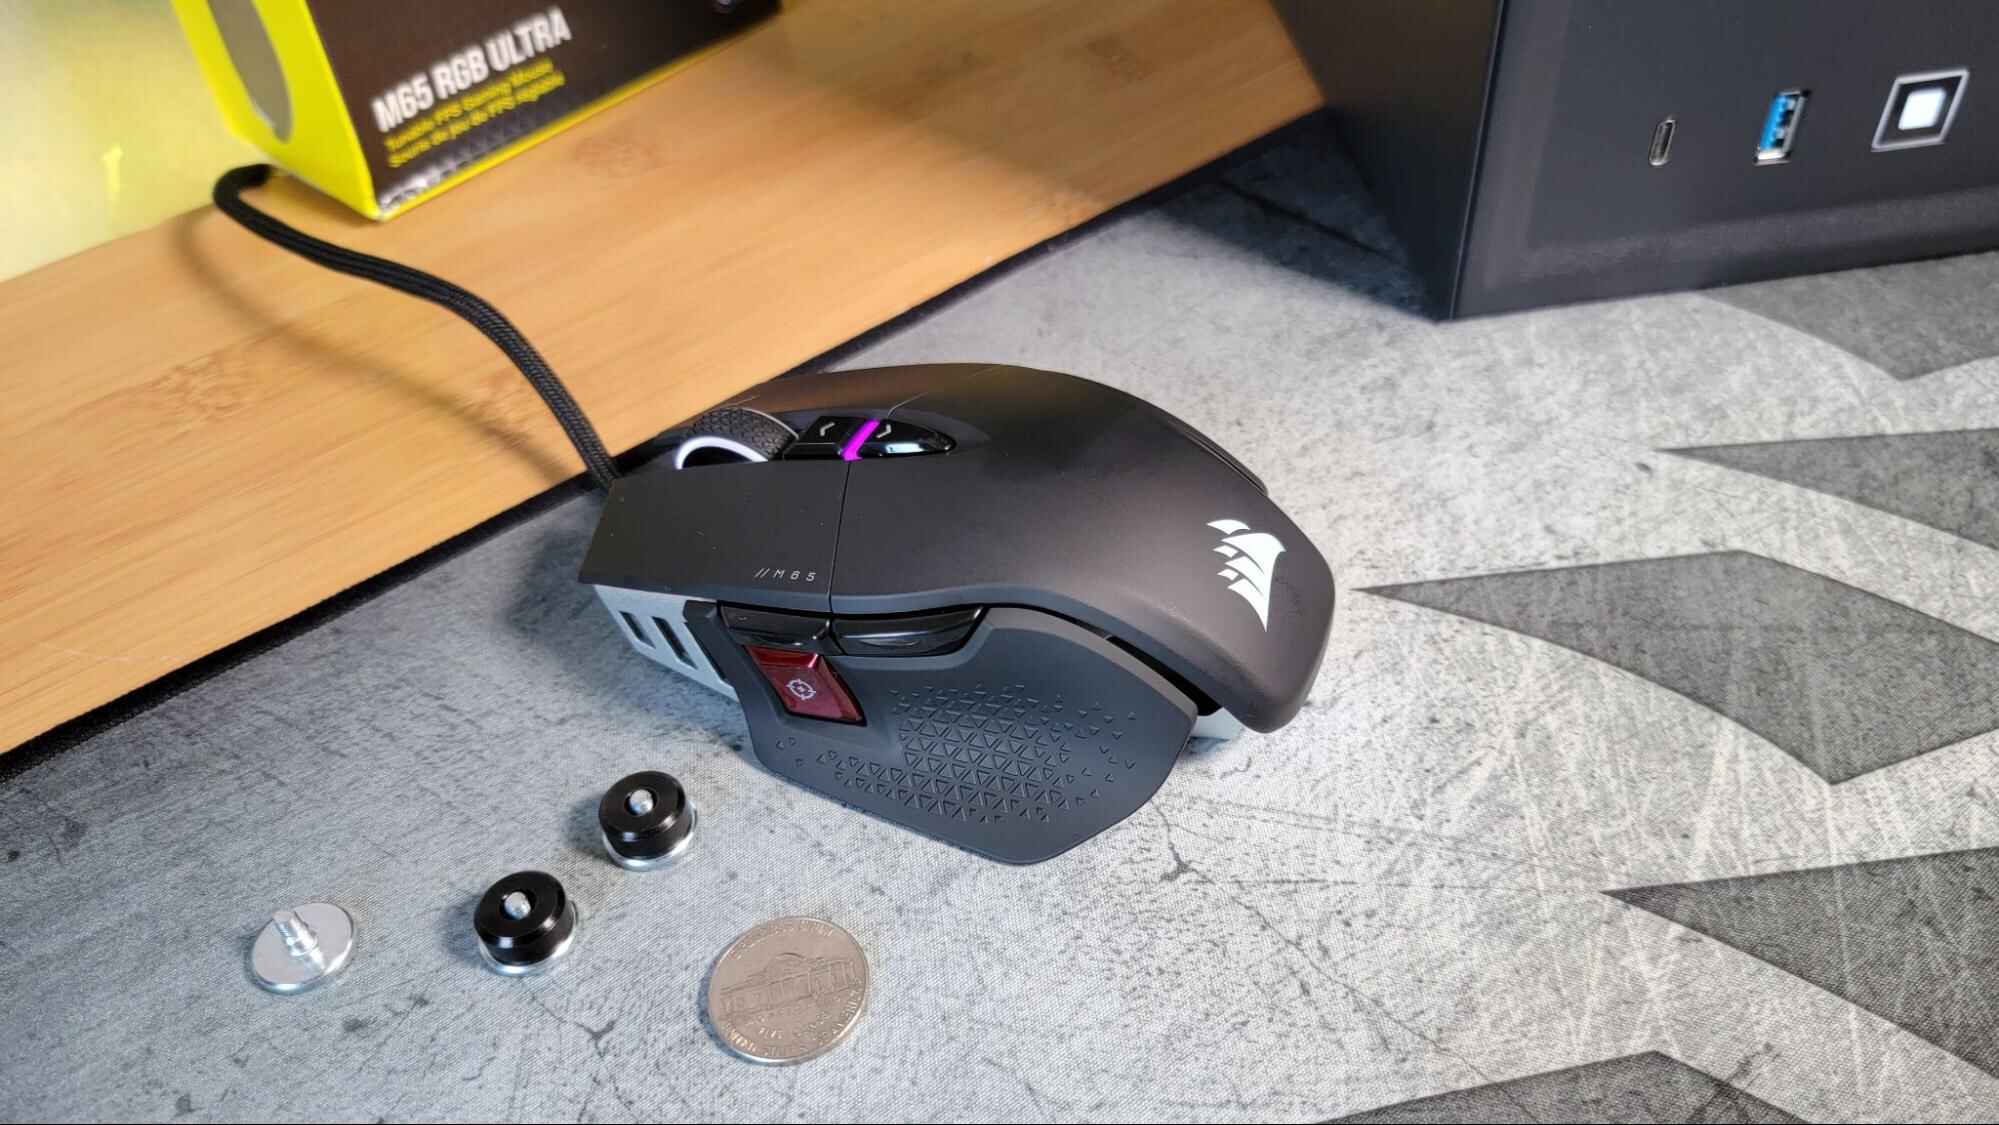 What Does The Sniper Button On The M65 Pro RGB Fps Gaming Mouse Do